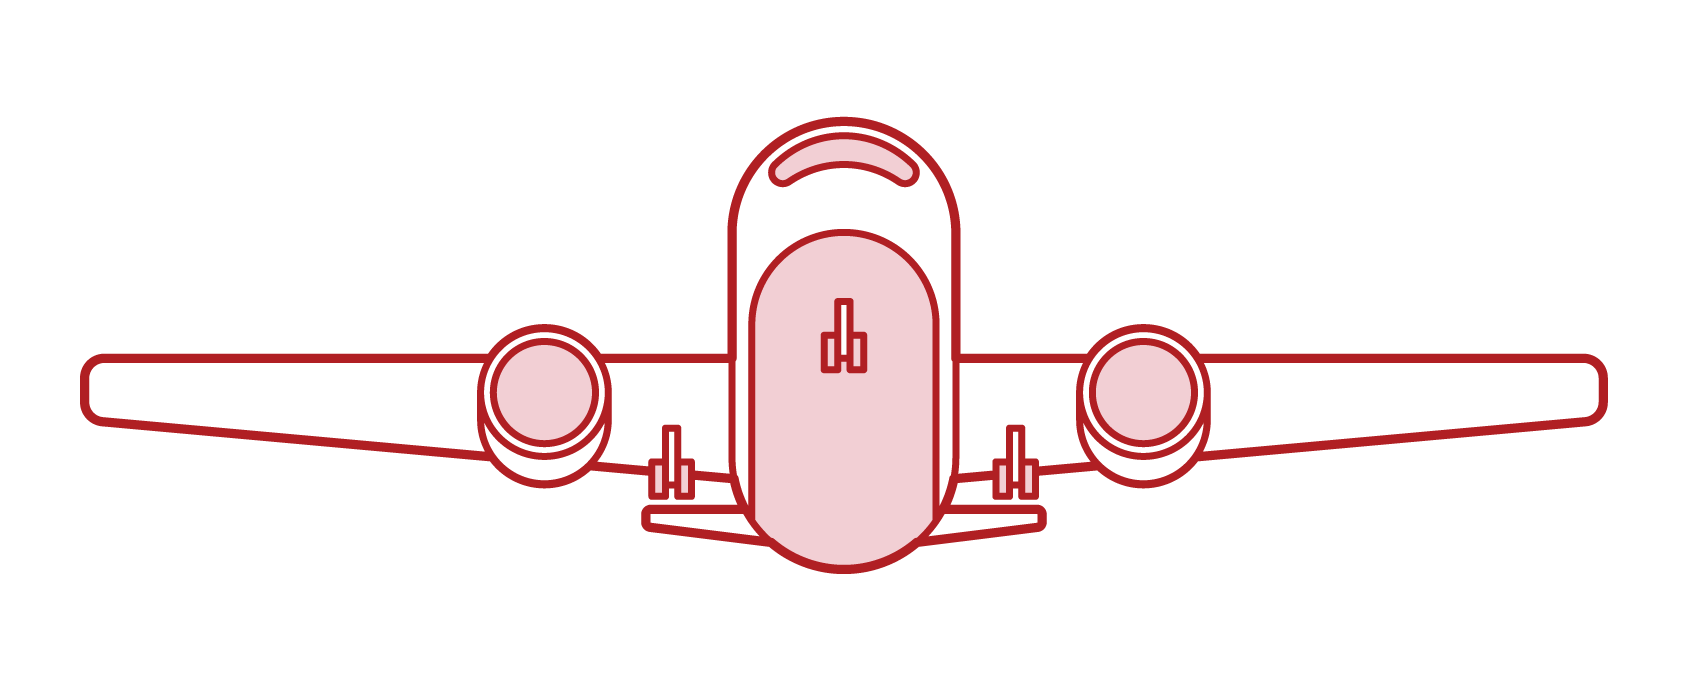 Illustration of the airplane seen from the front